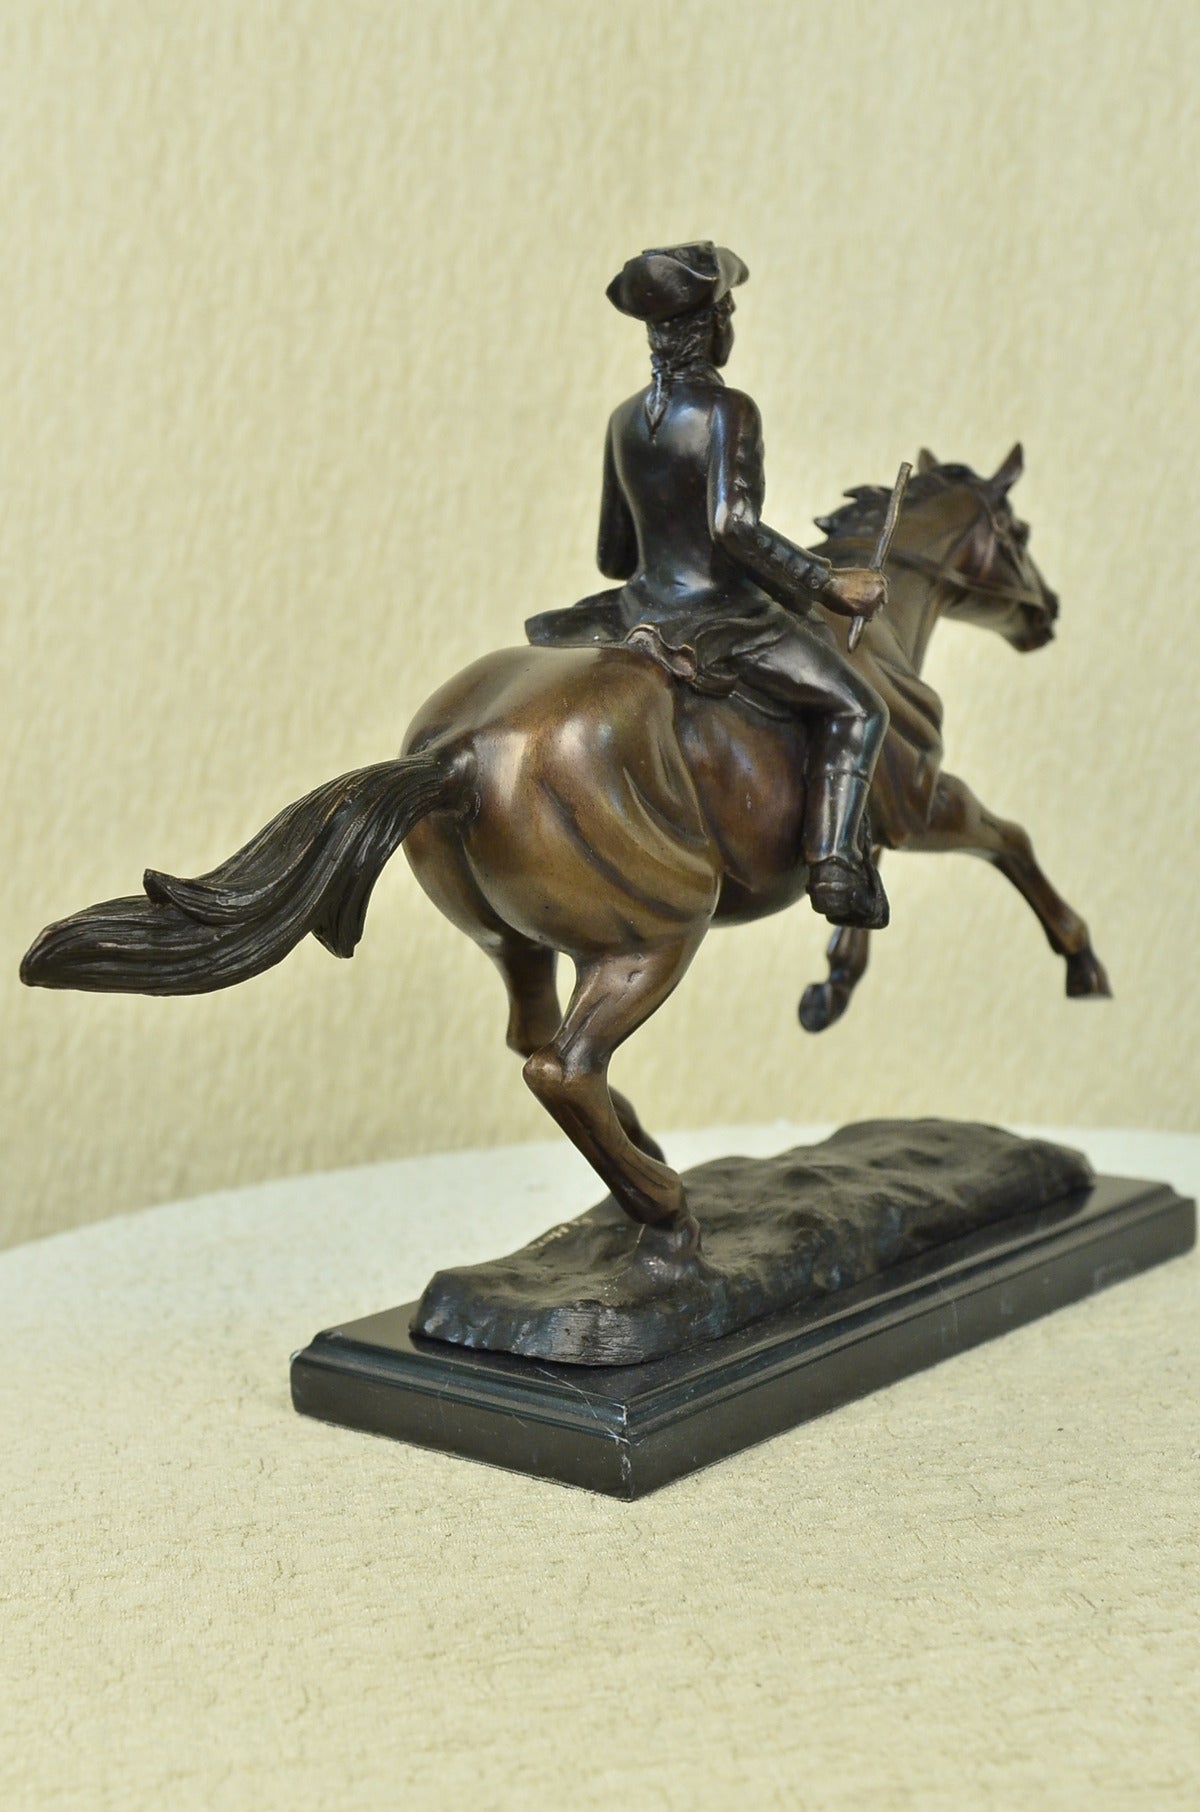 Handcrafted bronze sculpture SALE Marble Horse On Soldier French Mene Pj Signed